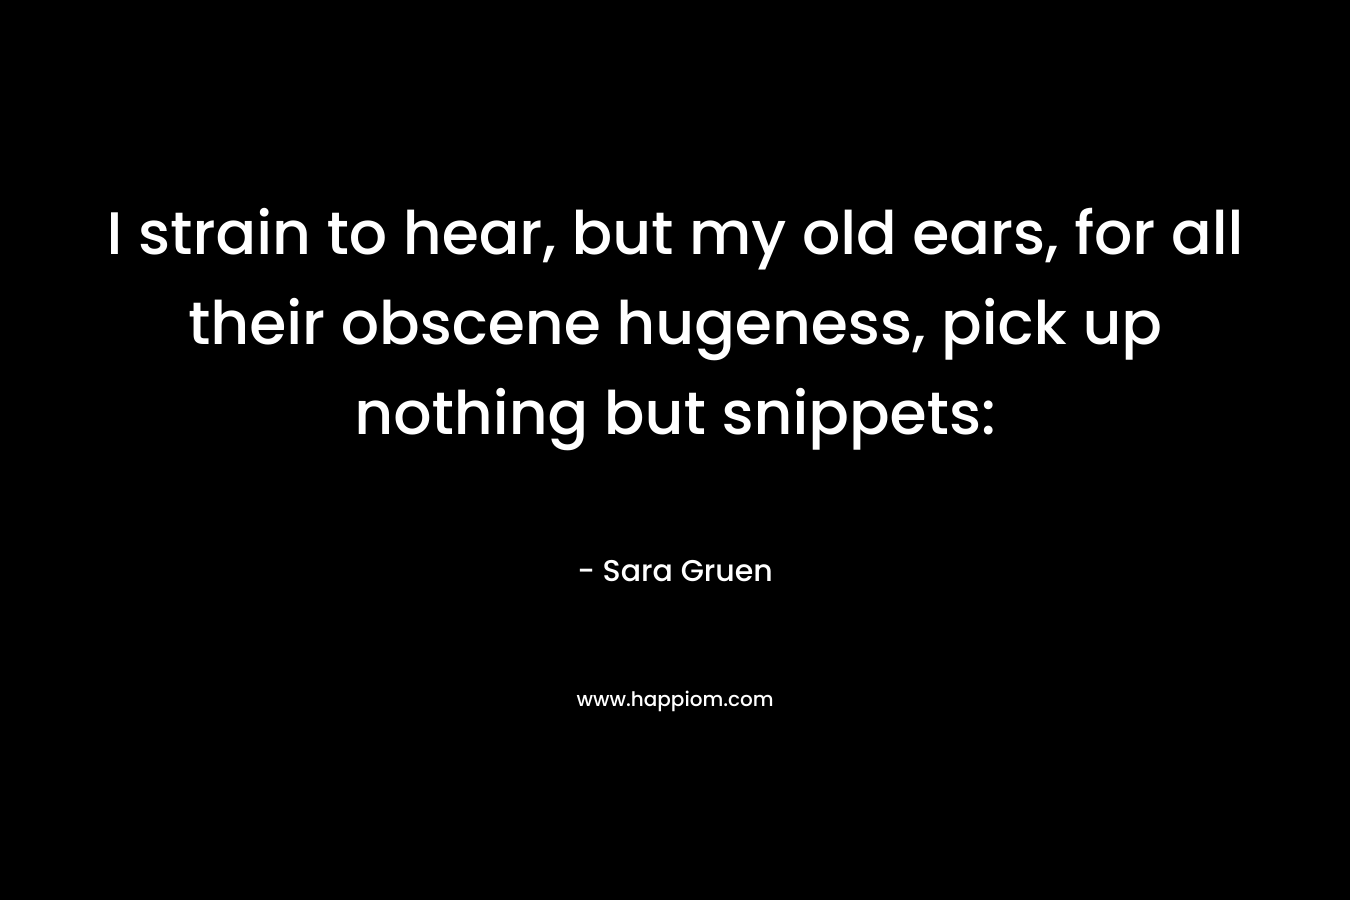 I strain to hear, but my old ears, for all their obscene hugeness, pick up nothing but snippets: